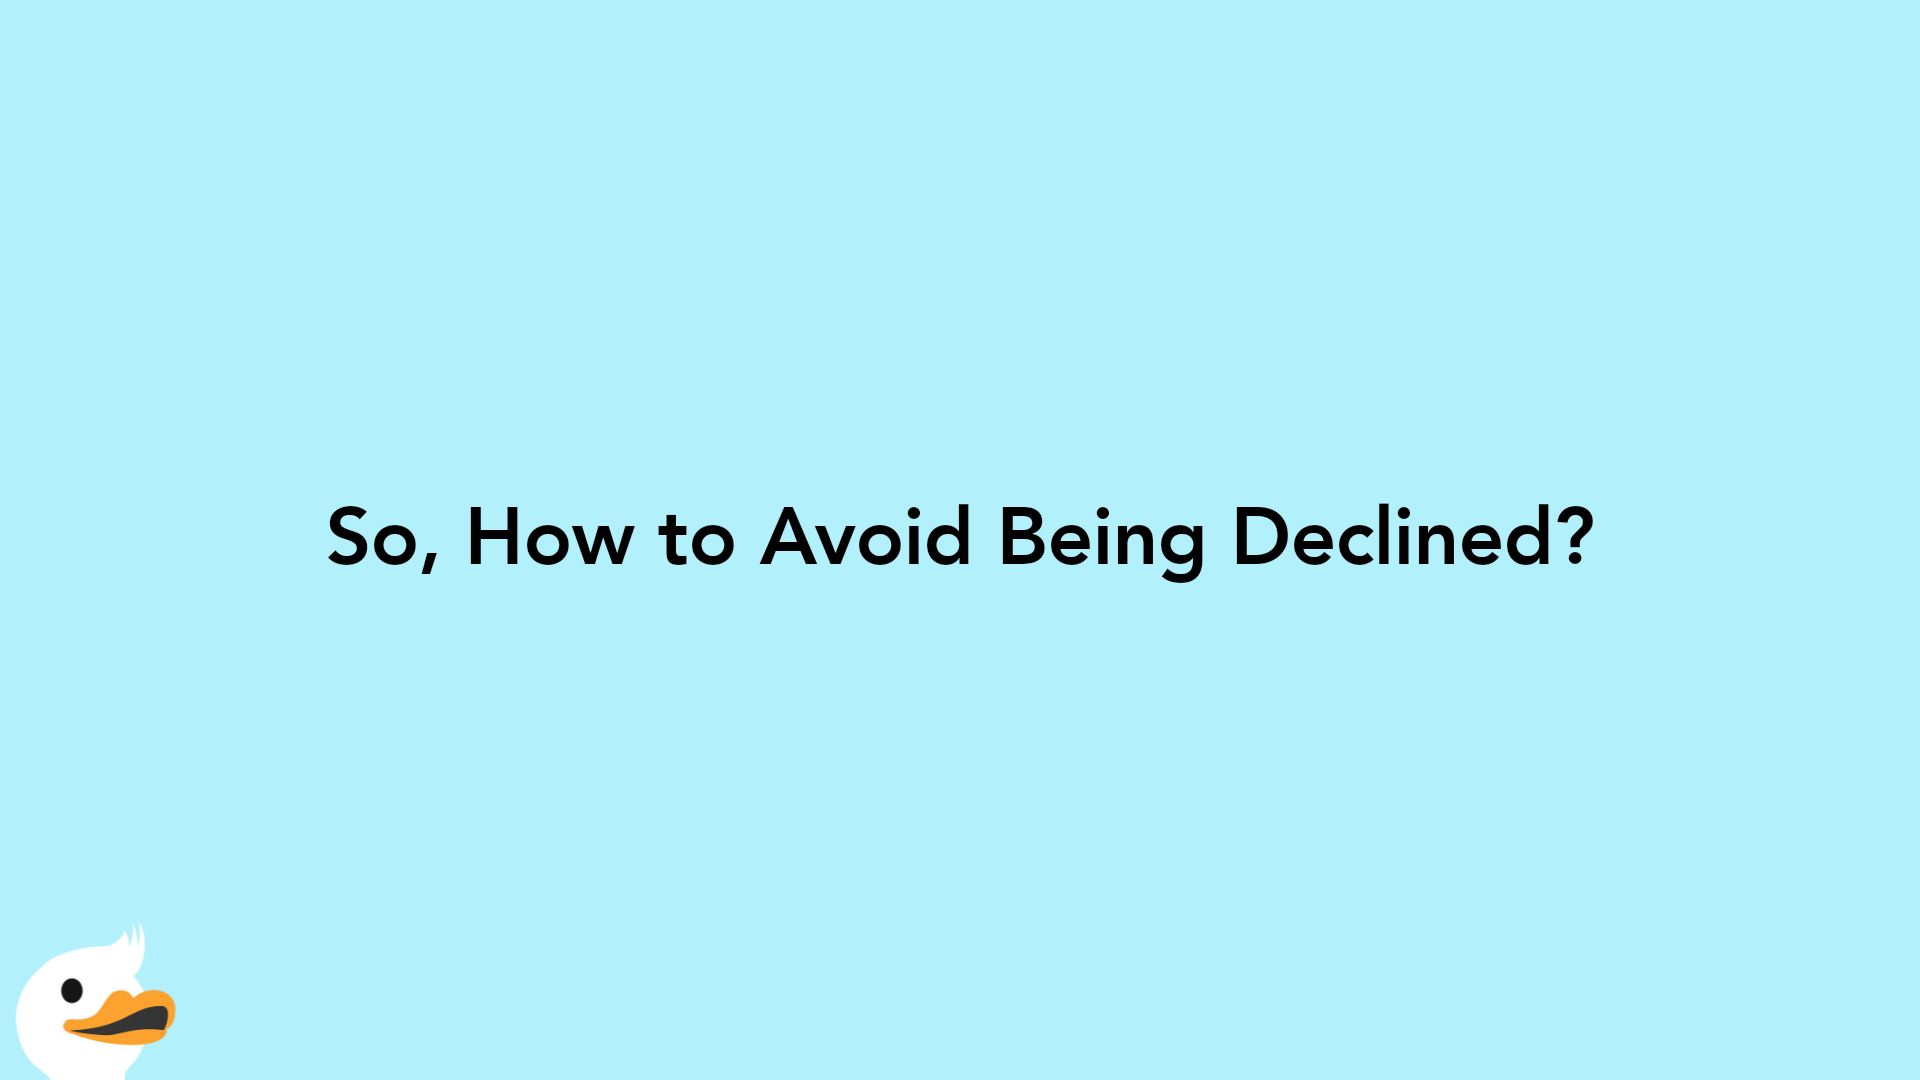 So, How to Avoid Being Declined?